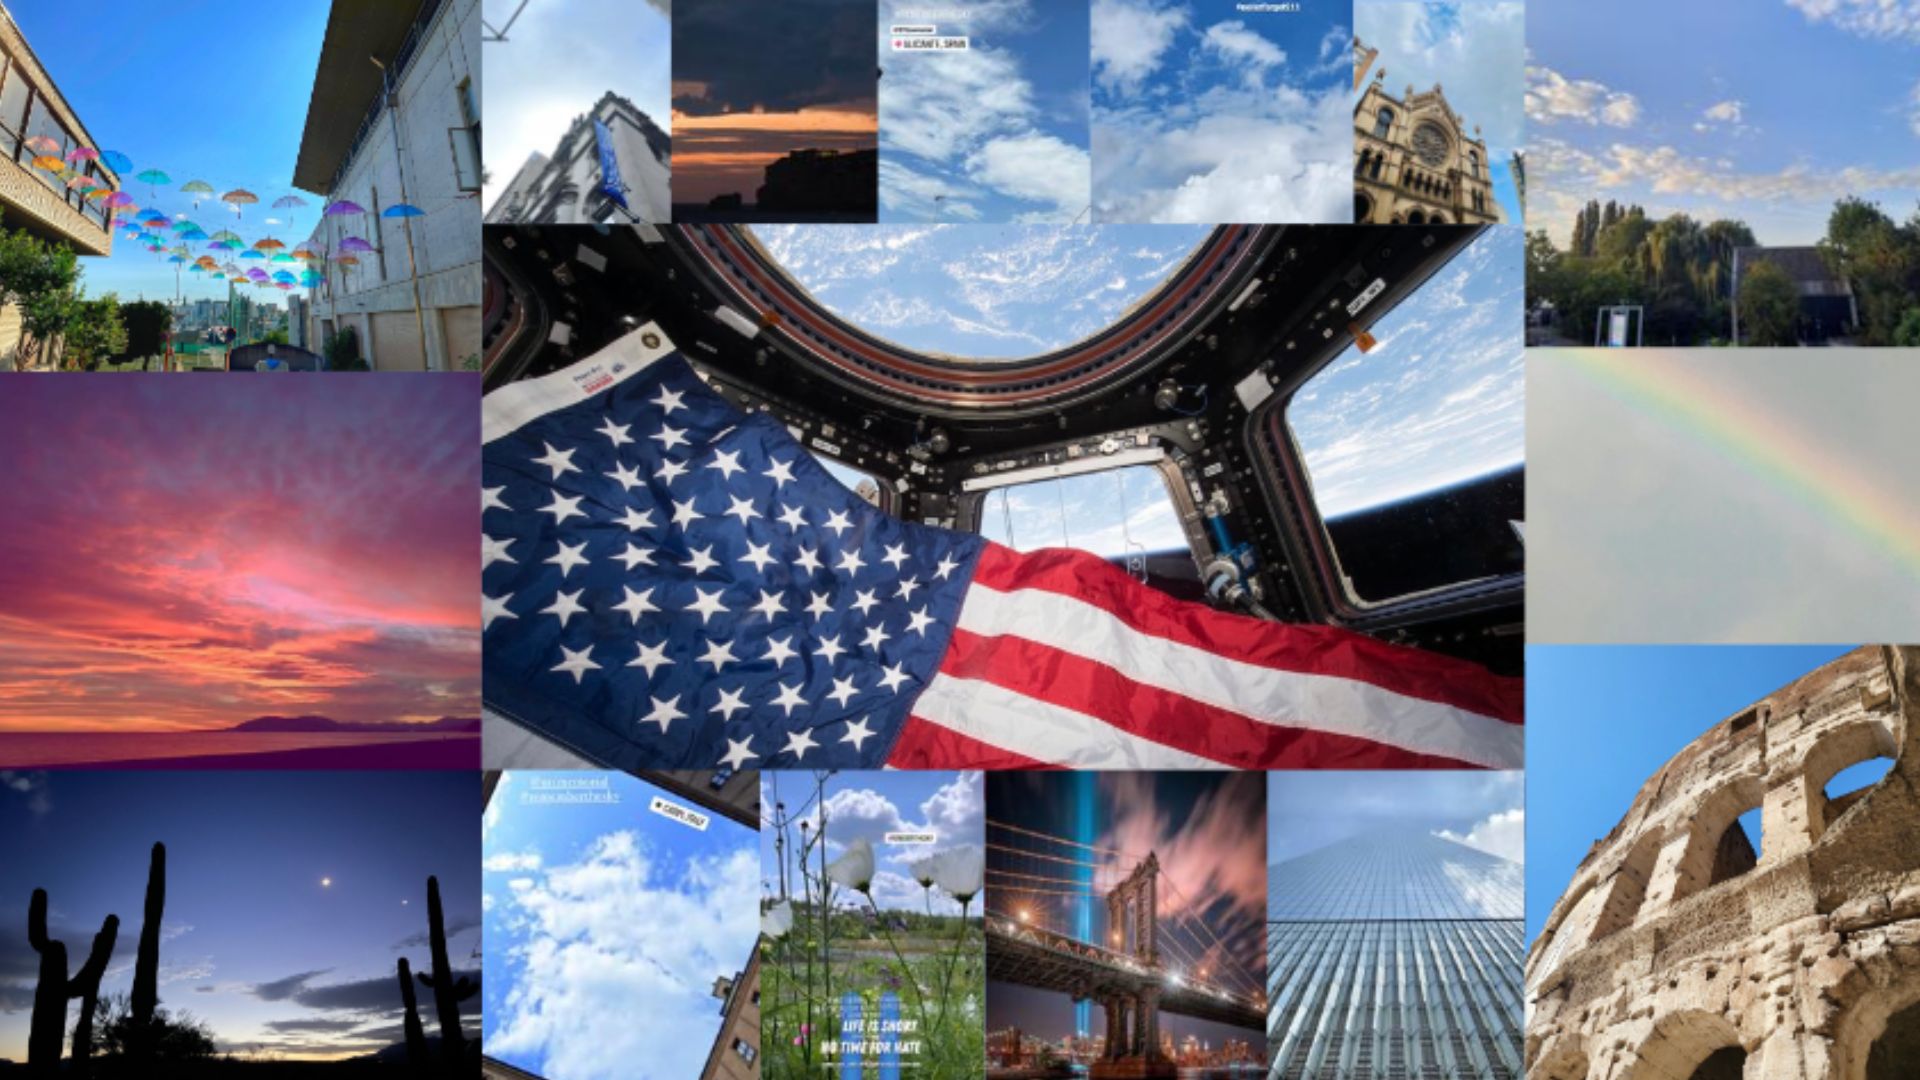 Collage of skies around the globe on September 11, with an American flag at center